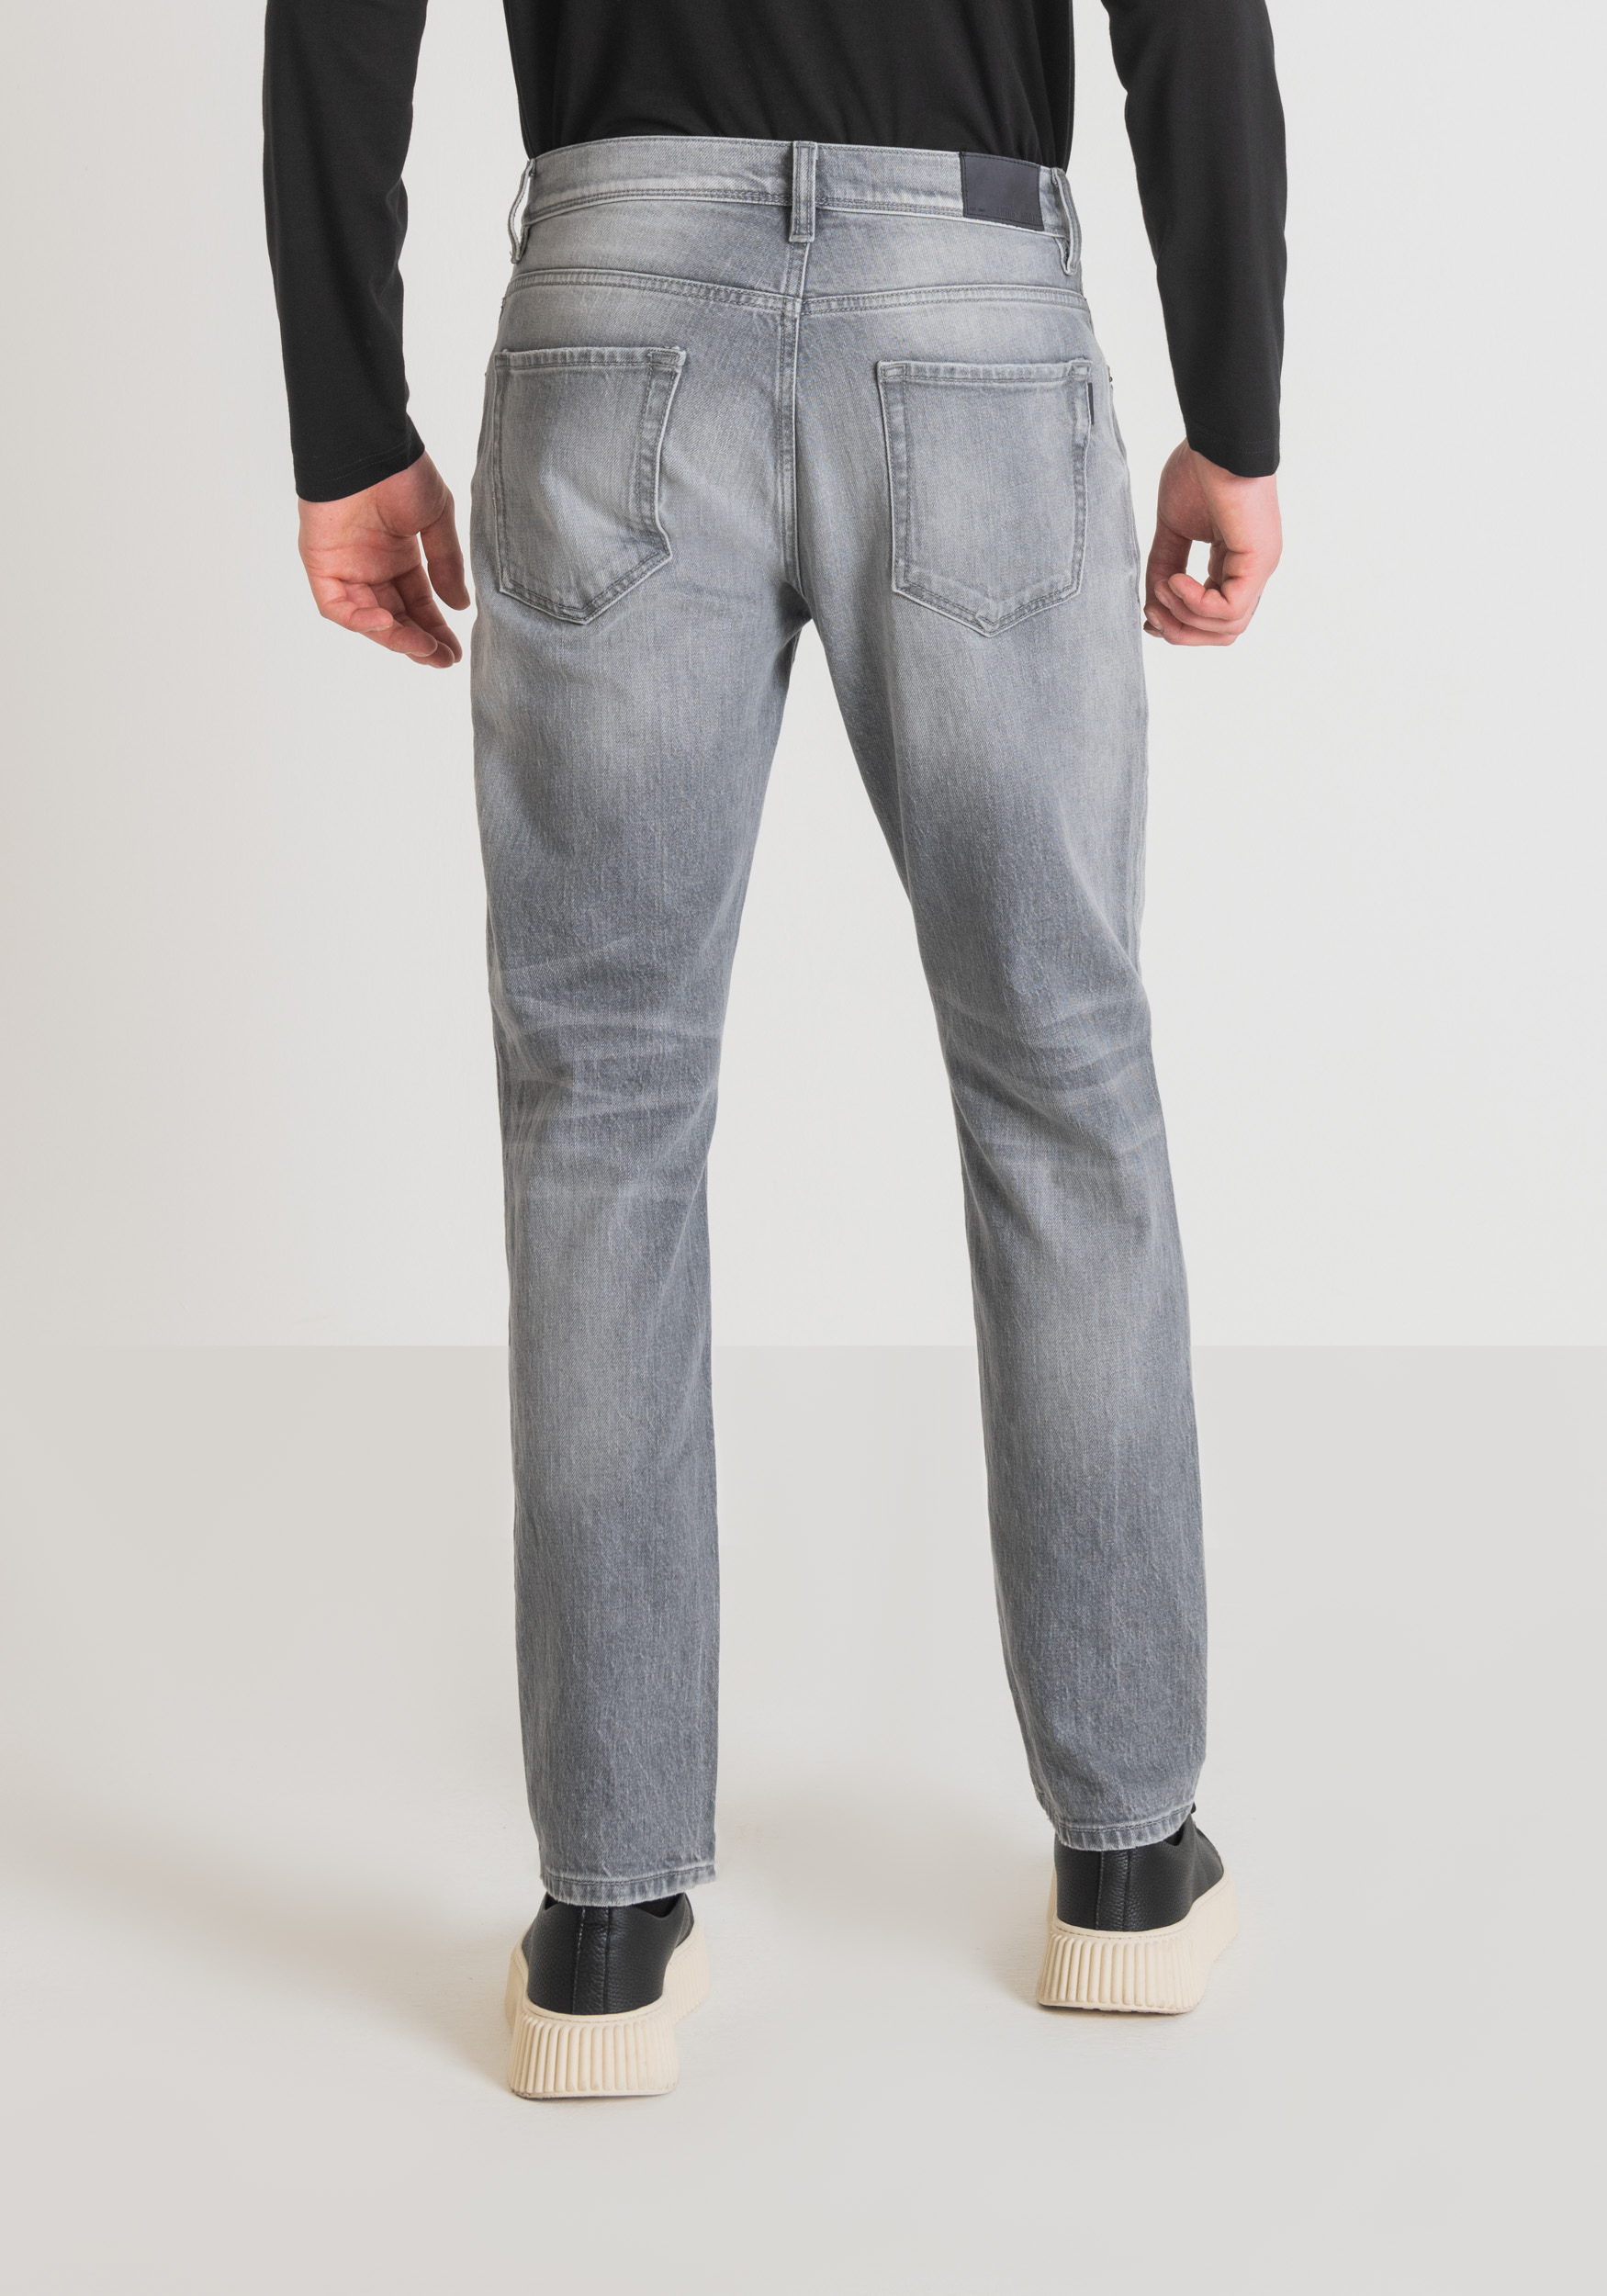 ARGON ANKLE-LENGTH SLIM FIT JEANS IN BLUE DENIM WITH MEDIUM WASH